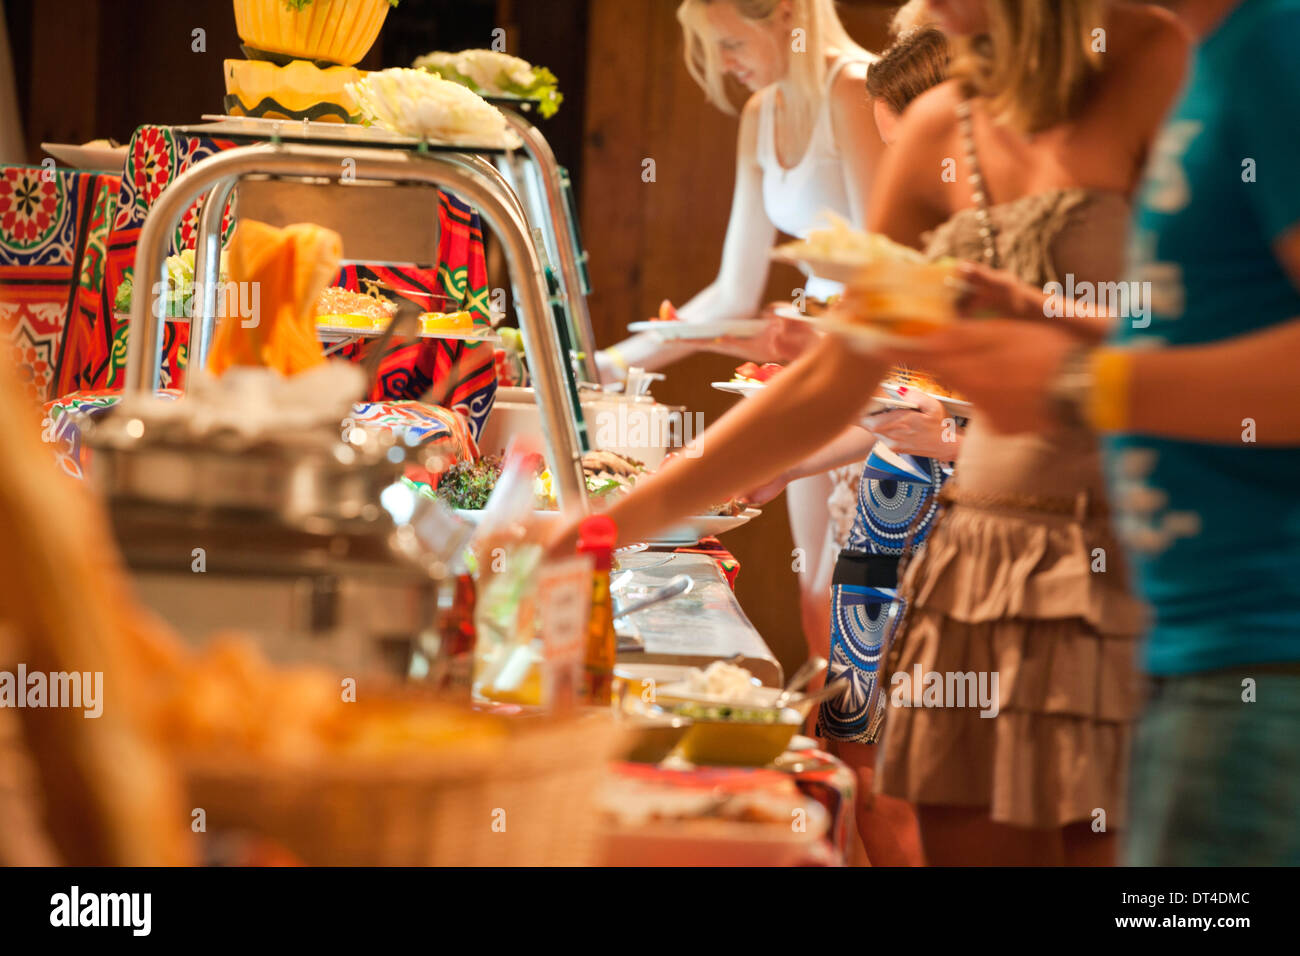 Abstract very shallow focus image of people at a buffet Stock Photo